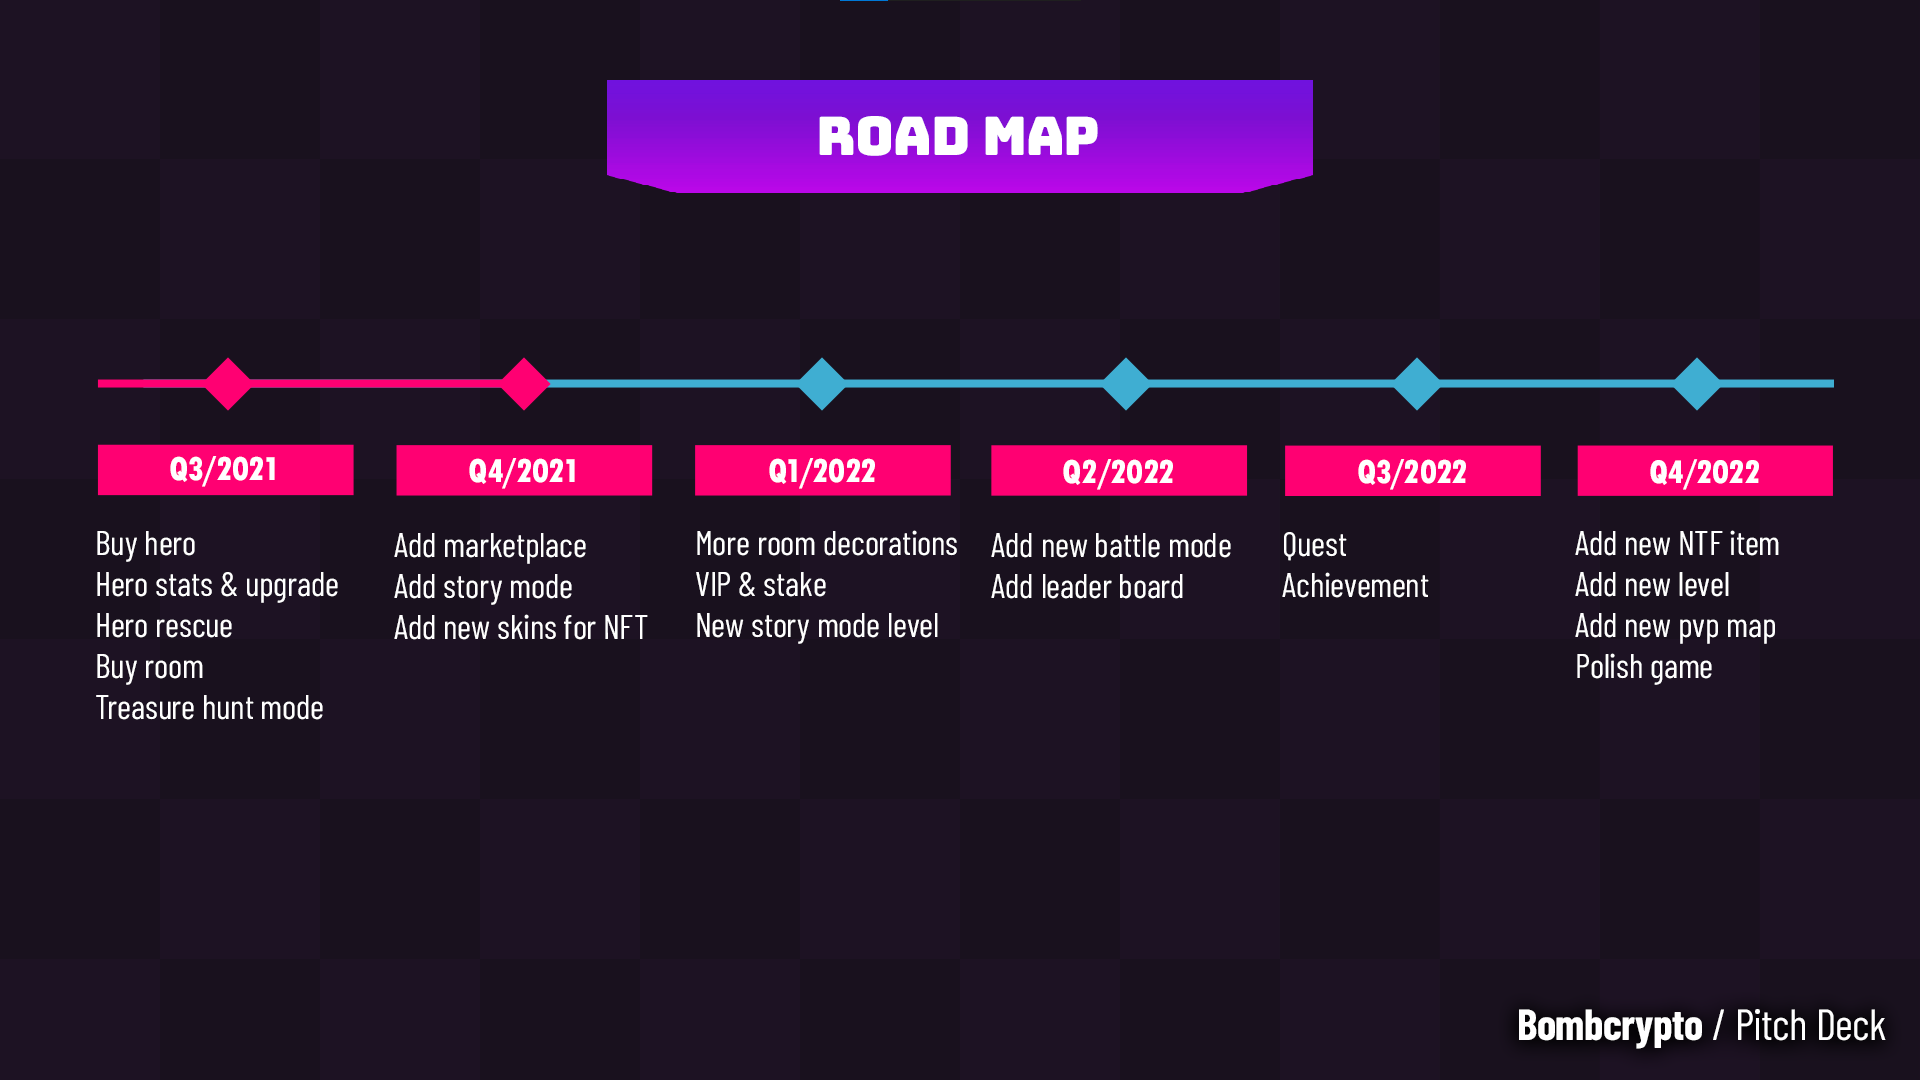 Hinh anh Roadmap game Bomb Crypto